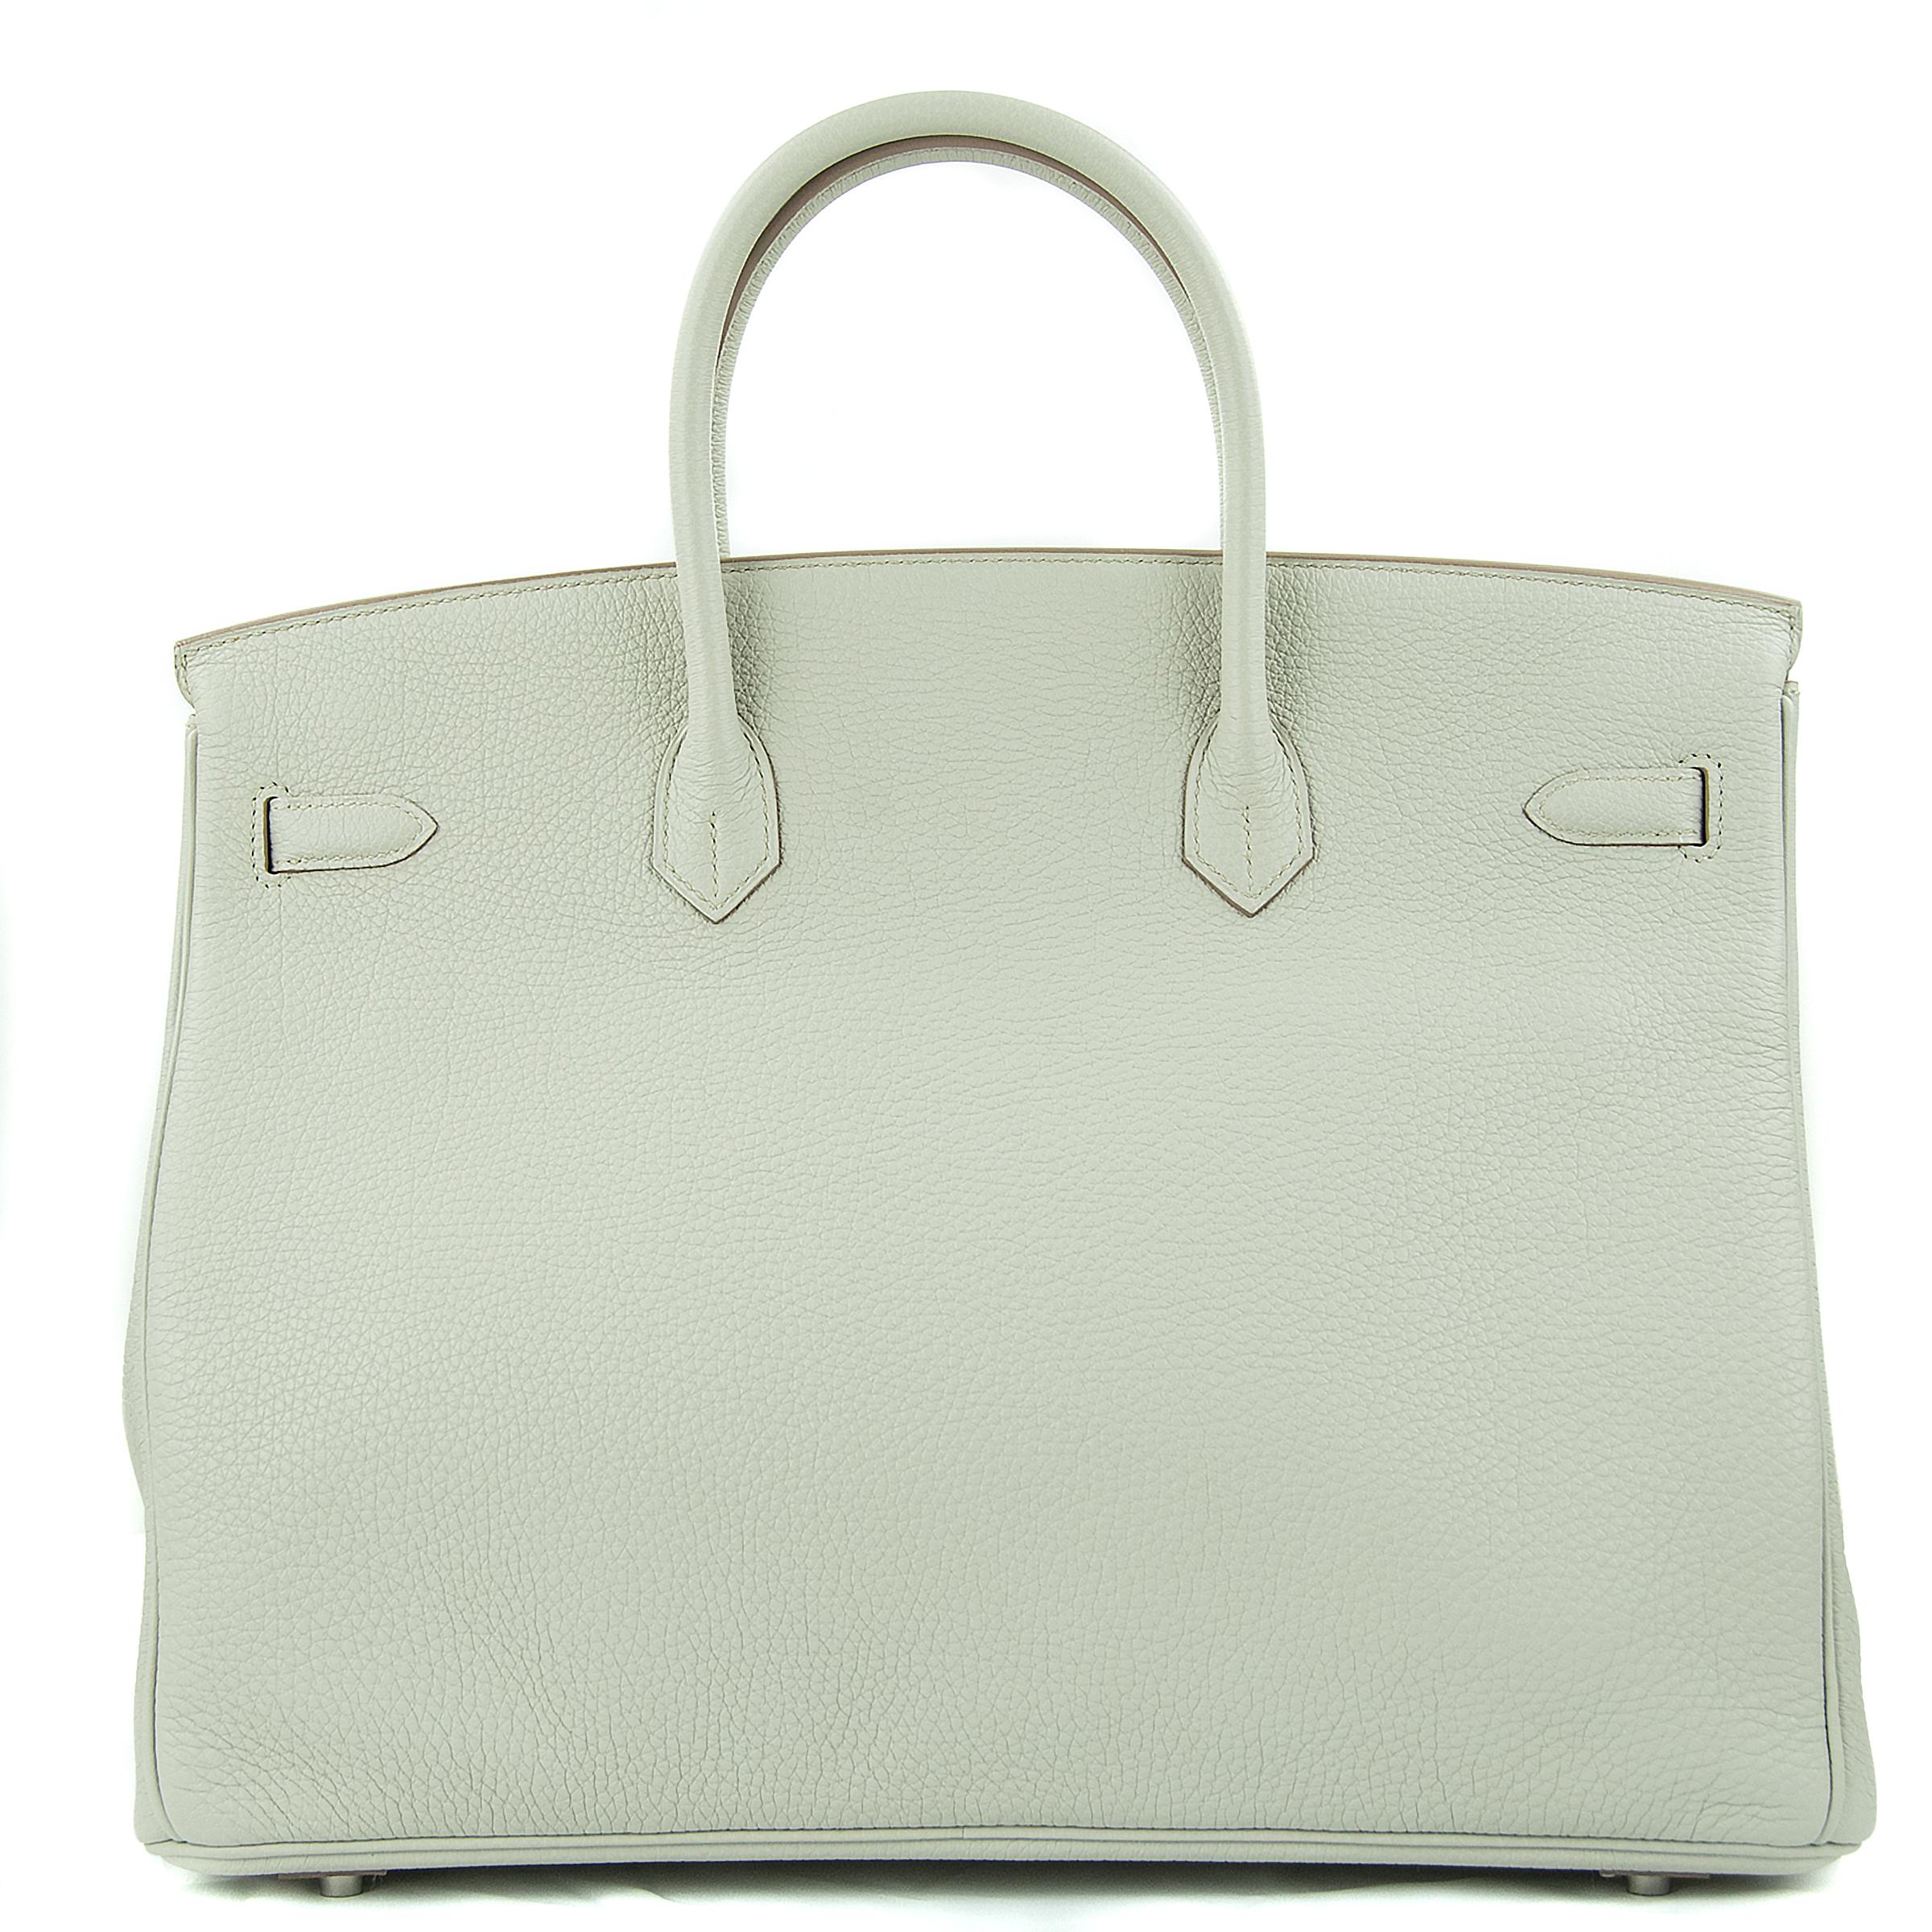 Hermes 40cm Birkin bag in Gris Mouette Togo. This iconic special order Hermes Birkin bag is timeless and chic. Fresh and crisp with palladium hardware.

    Condition: New or Never Used
    Made in France
    Bag Measures: 40cm (15.7